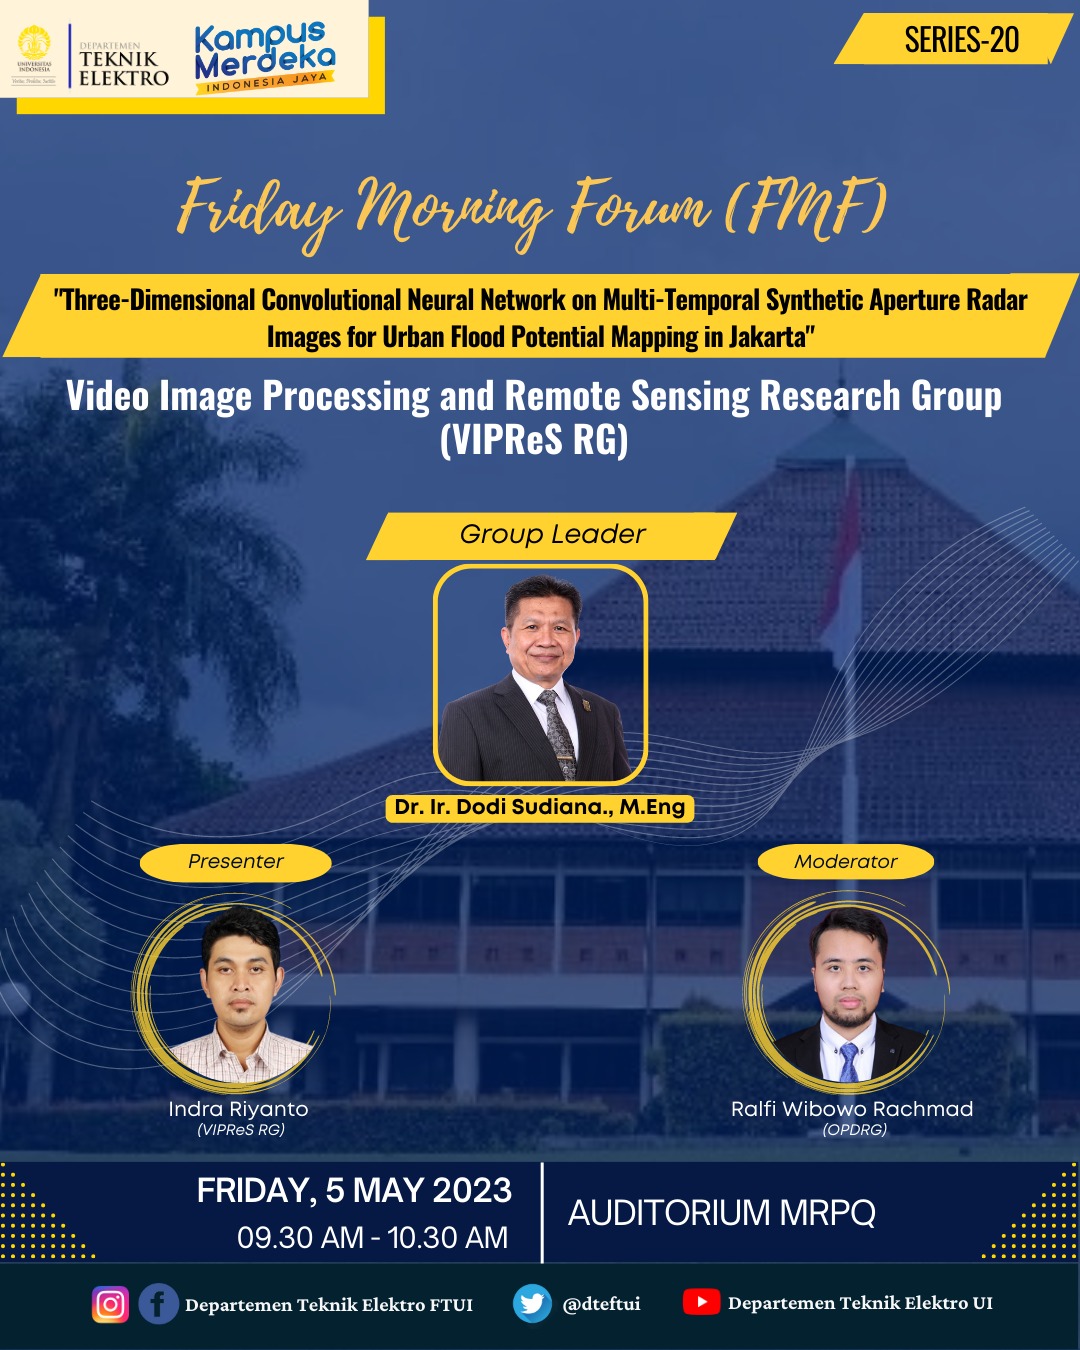 [FMF SERIES-20] Three-Dimensional Convolutional Neural Network on Multi-Temporal Synthetic Aperture Radar Images for Urban Flood Potential Mapping in Jakarta